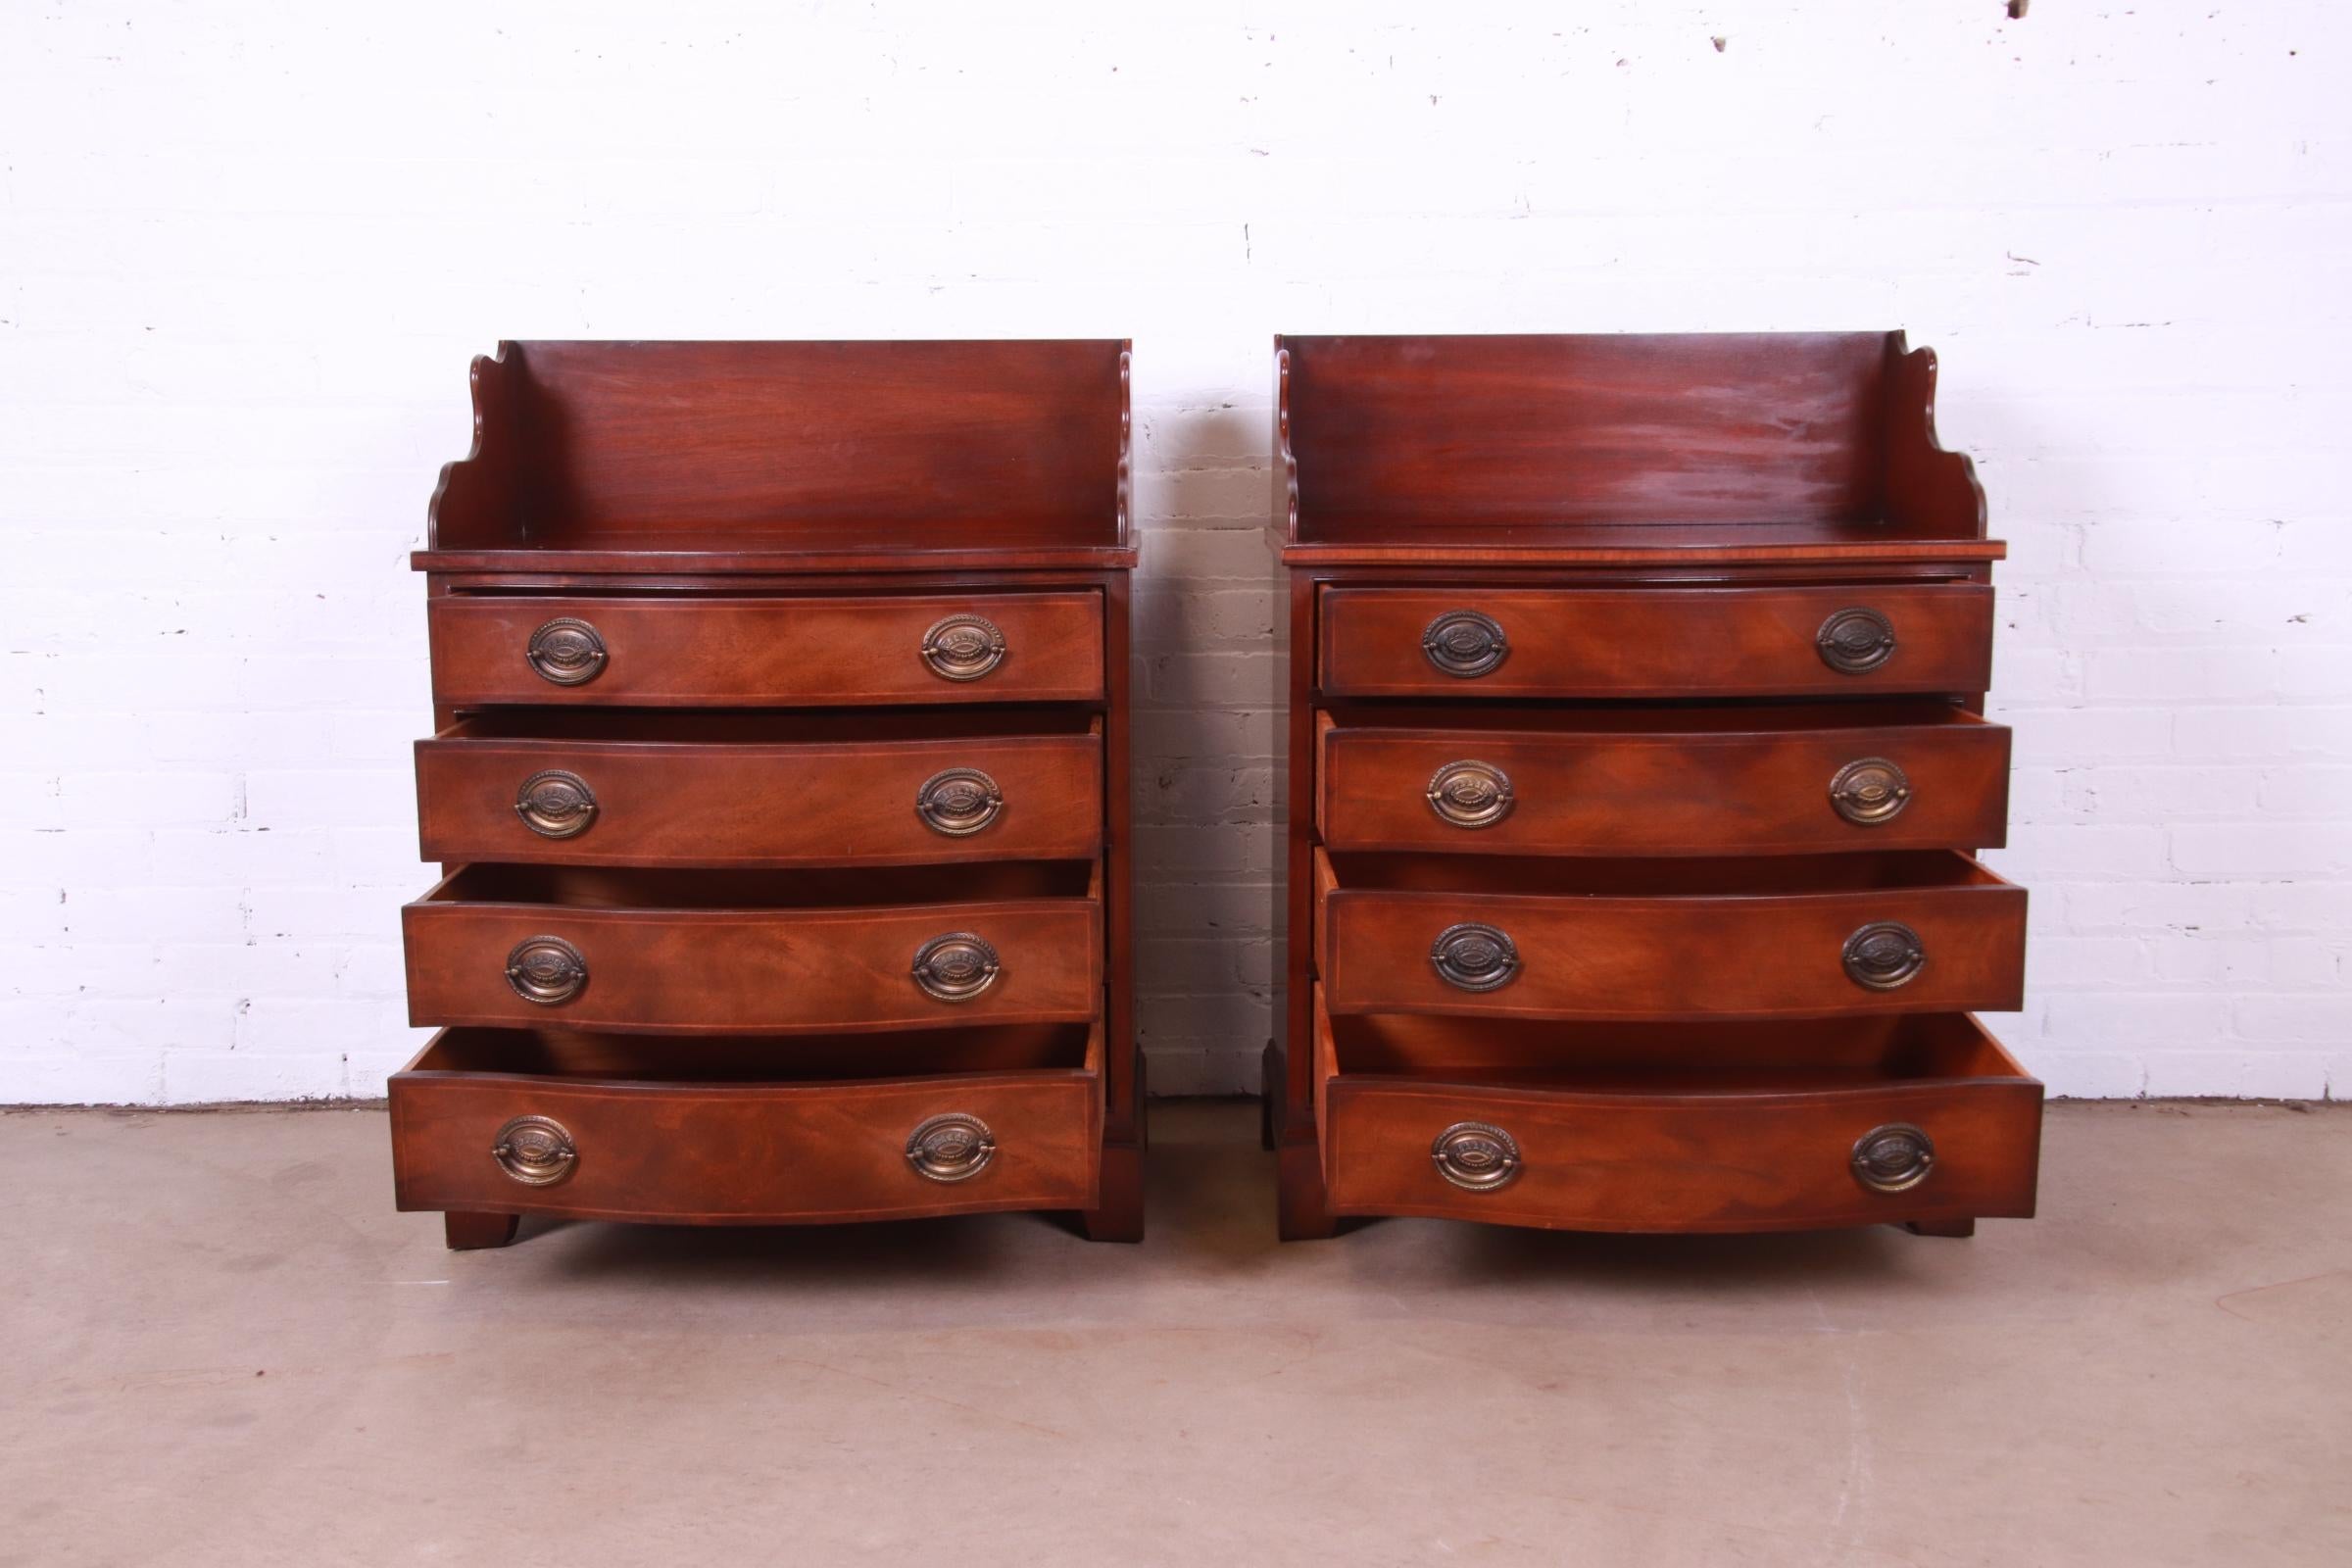 Henredon Georgian Inlaid Mahogany Serpentine Bachelor Chests or Nightstands For Sale 2